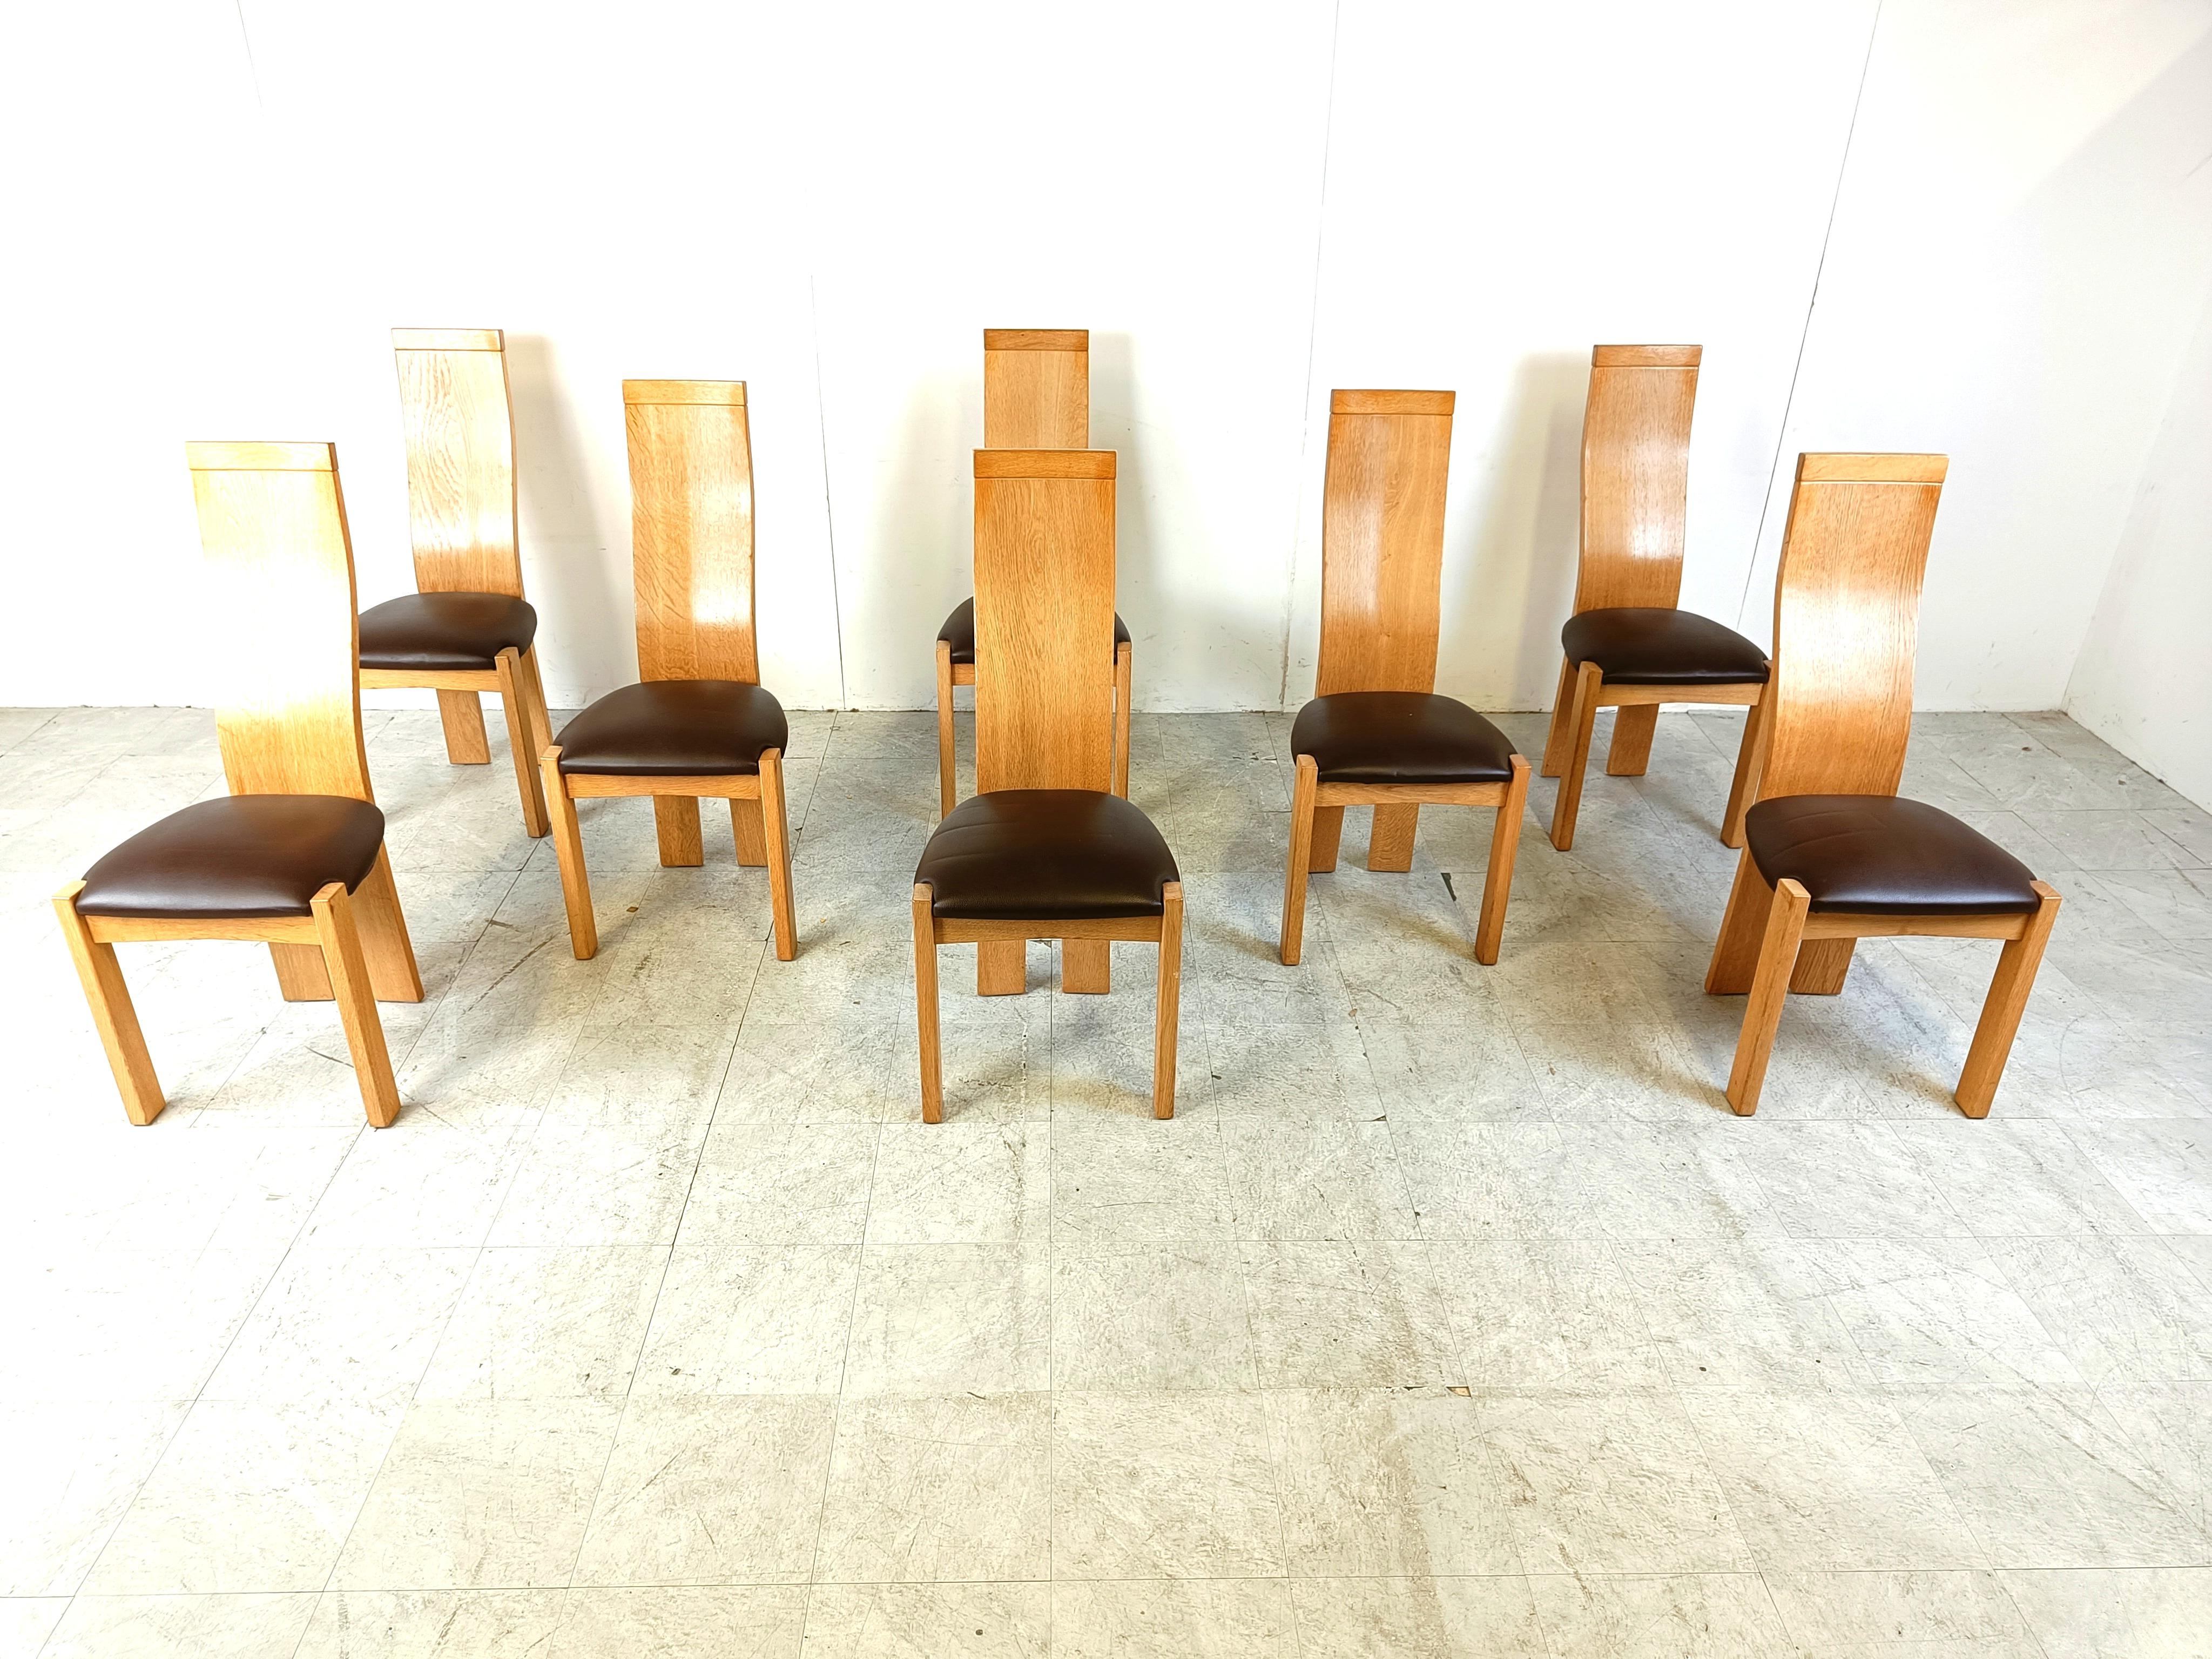 Elegant, sculptural high back dining chairs by Vanden Berghe Pauvers.

Beautiful timeless design with brown leather seats.

The chairs are in overal good condition.

1980s - Belgium

Dimensions:
Height: 108cm
Width x depth: 47cm
Seat height: